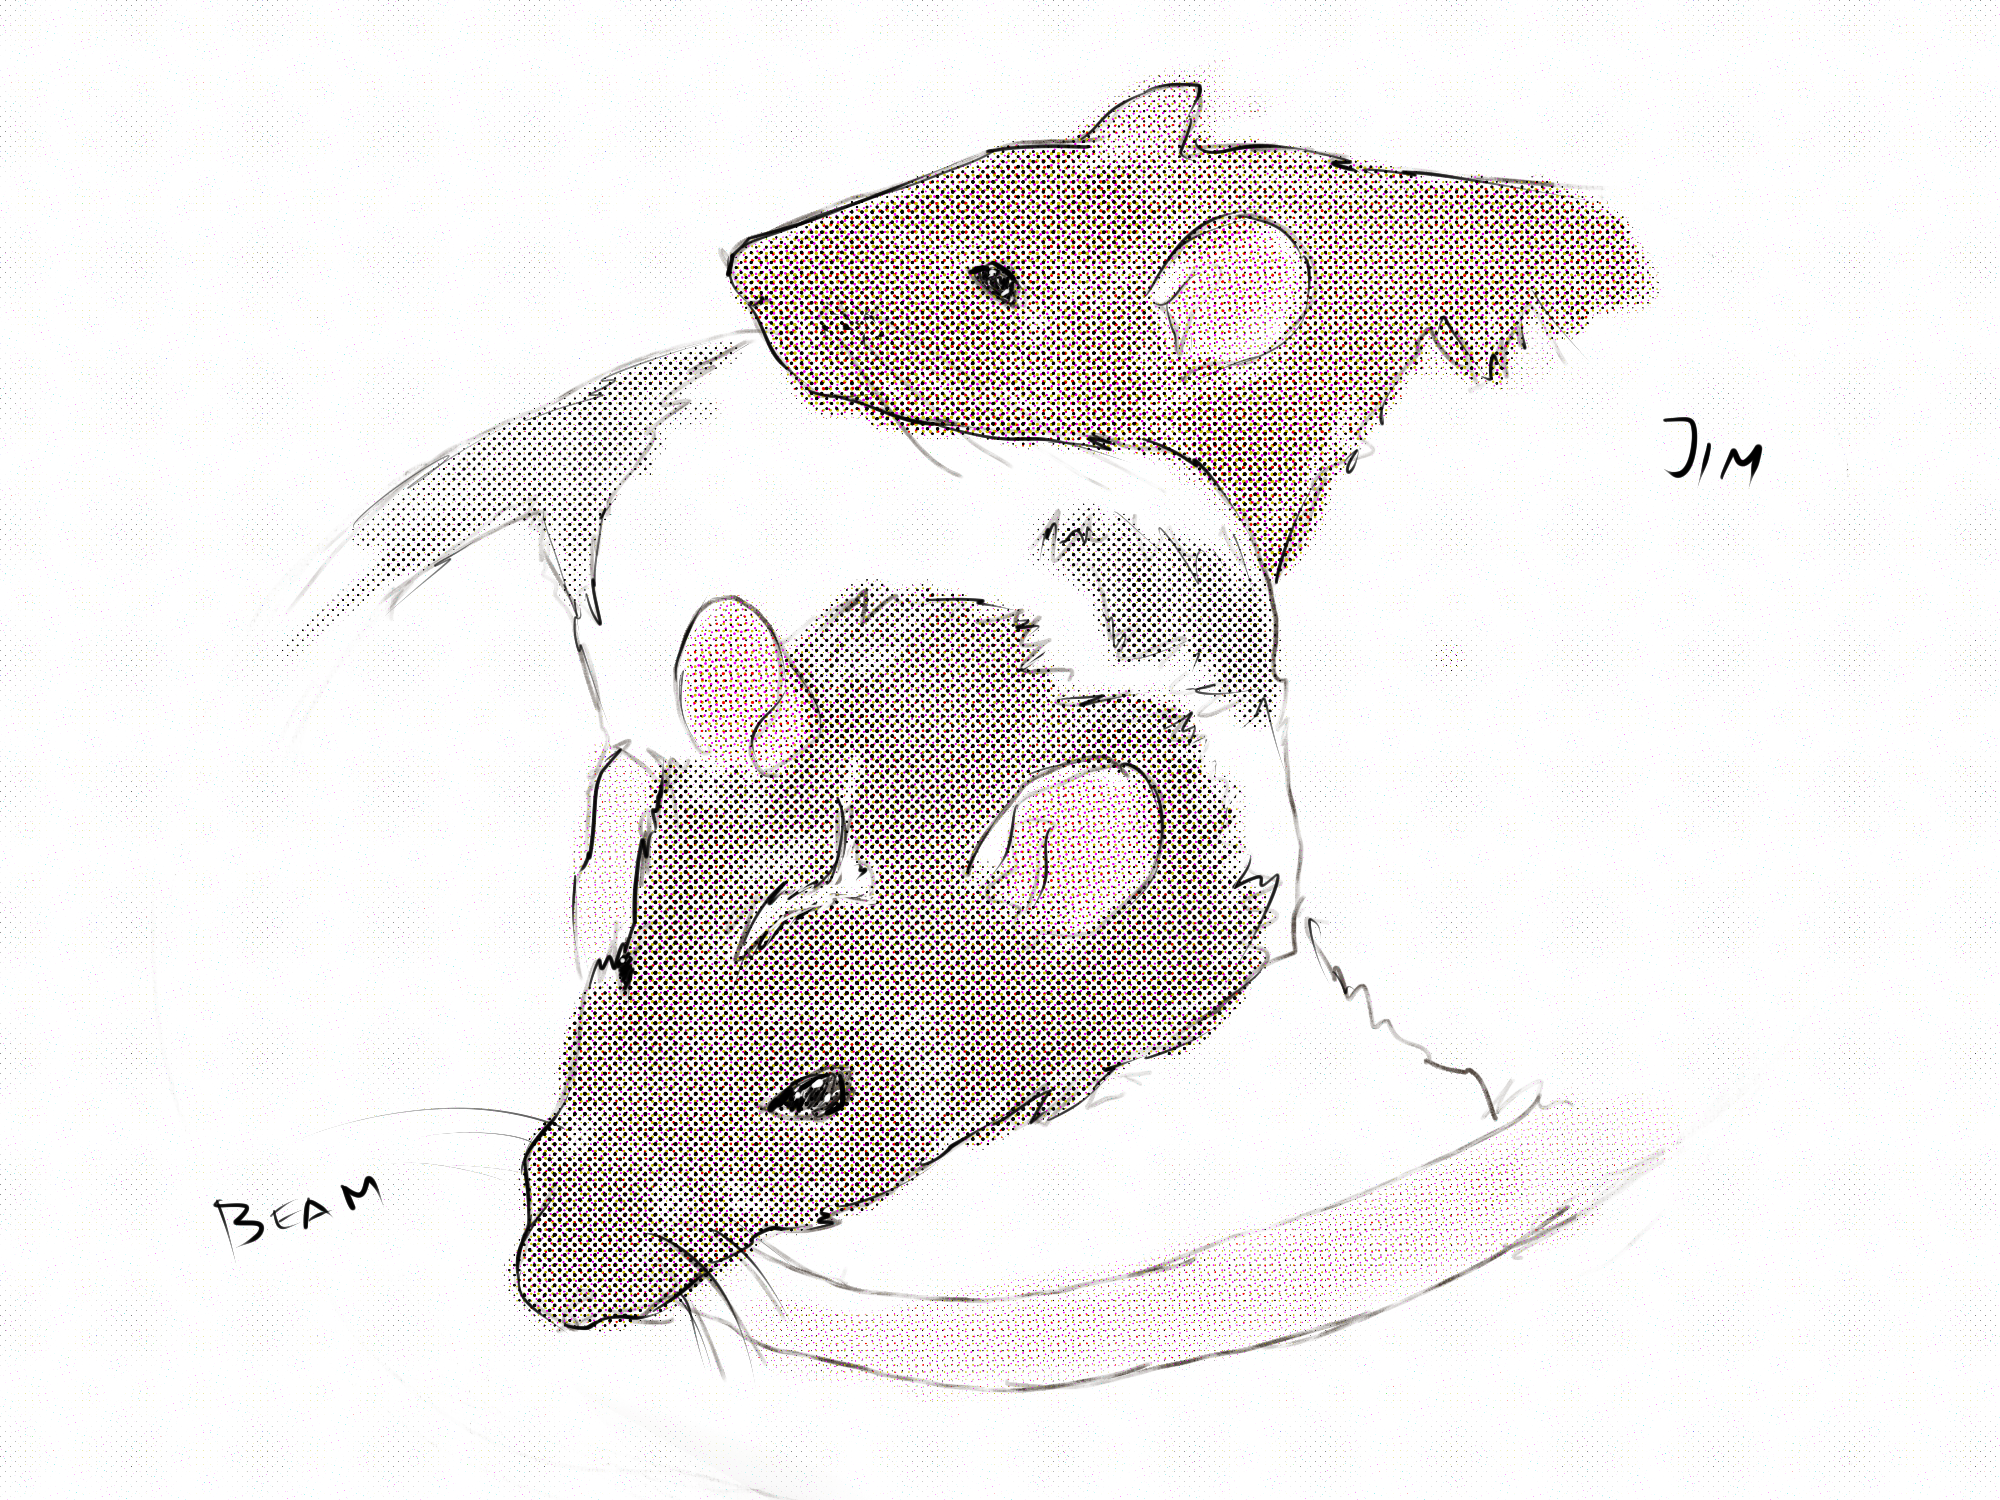 Drawing by Viktoriia Shcherbak of our two rats, Jim and Beam.